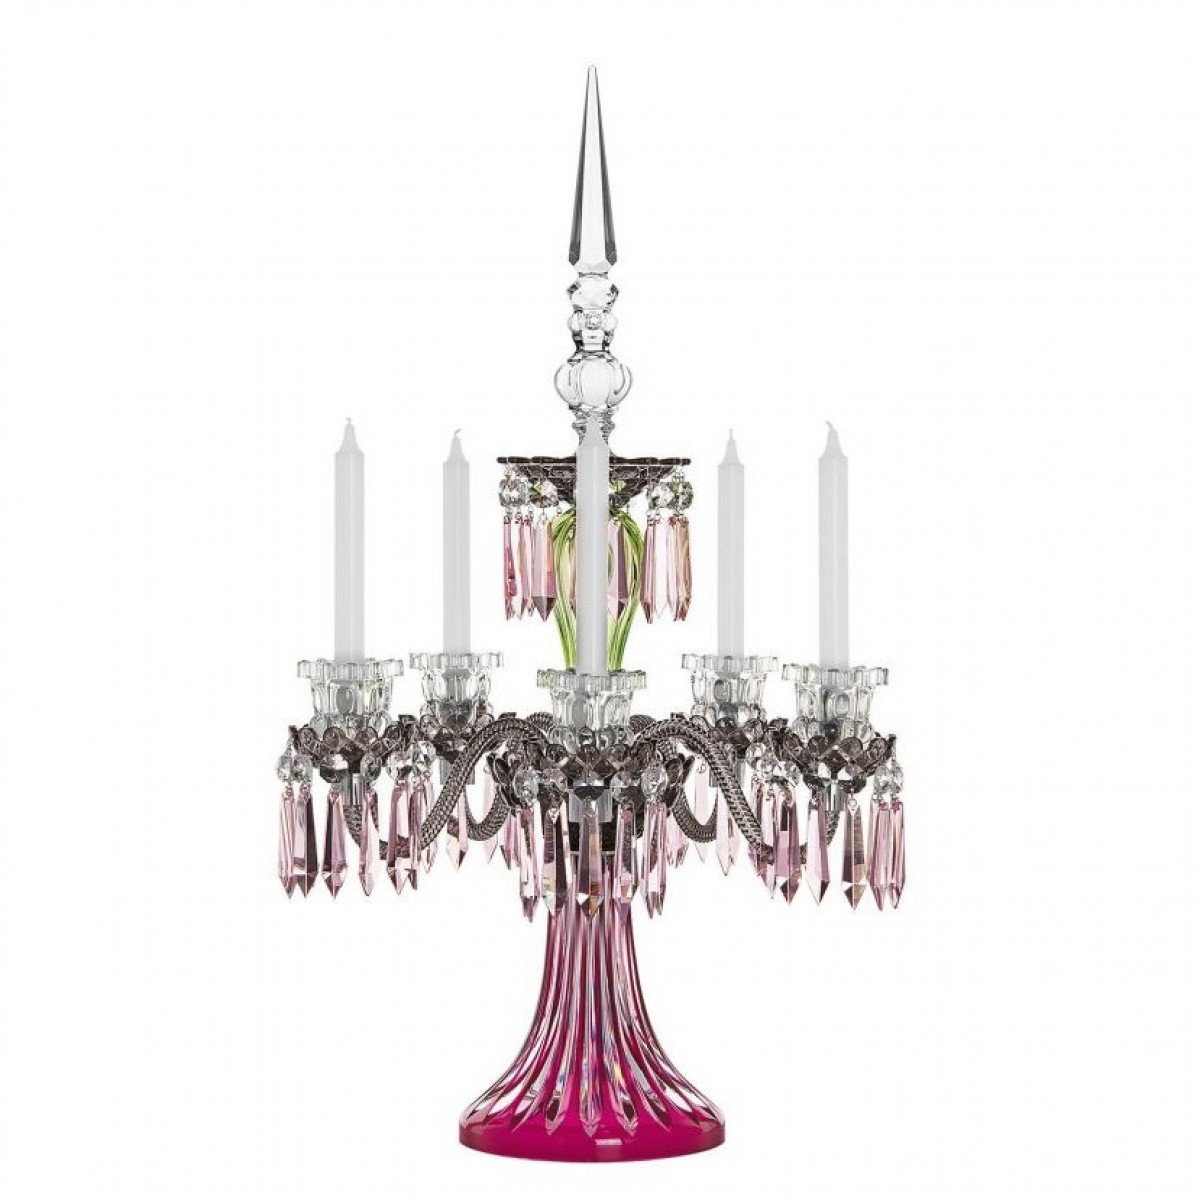 Arlequin 5-Candle Candelabra - Amethyst, Chartreuse-Green and Flannel-grey